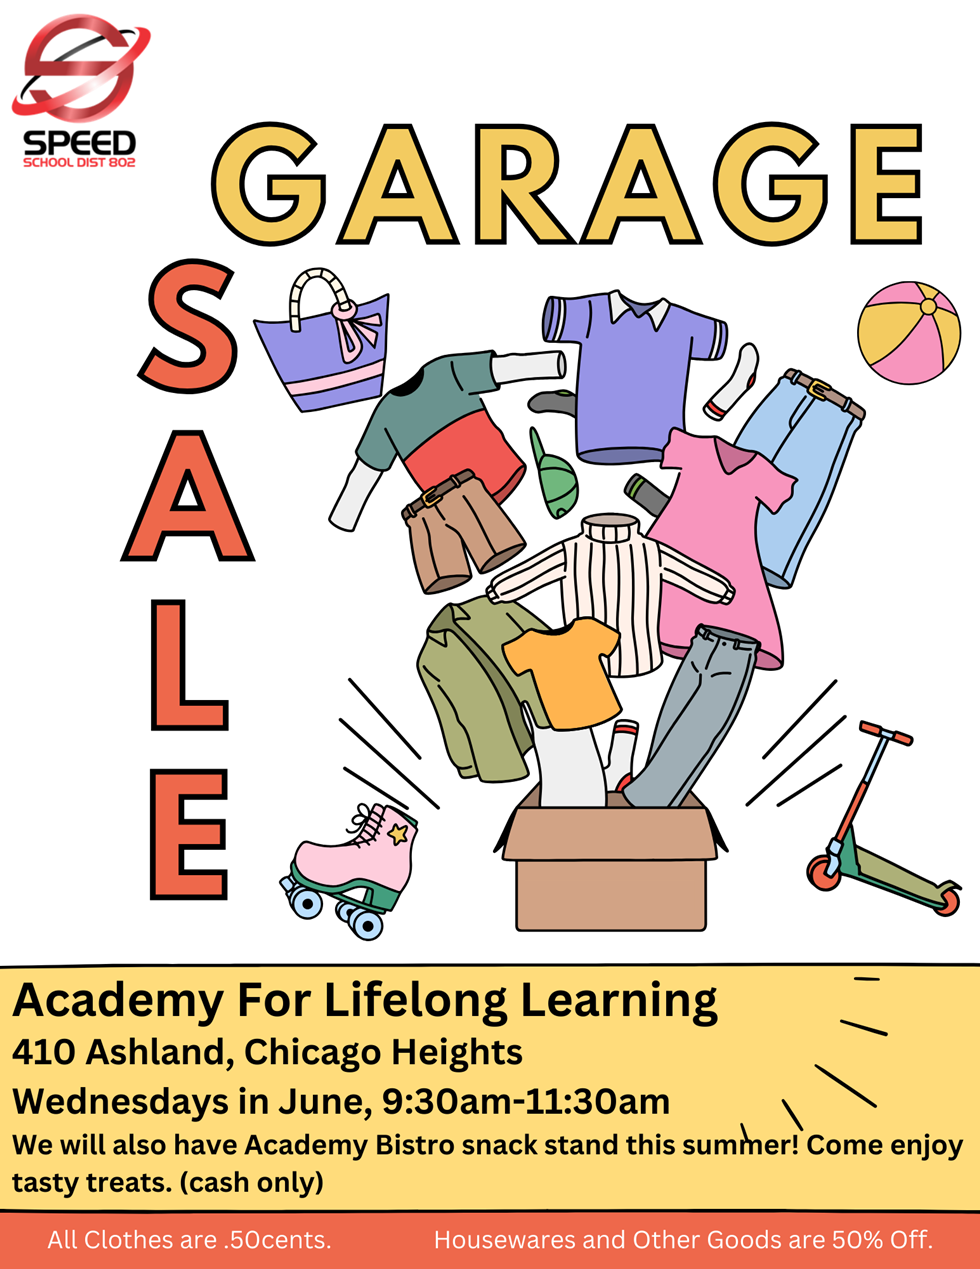 The Academy for Lifelong Learning will be hosting garage sales on Wednesdays in June from 9:30am - 11:30am.